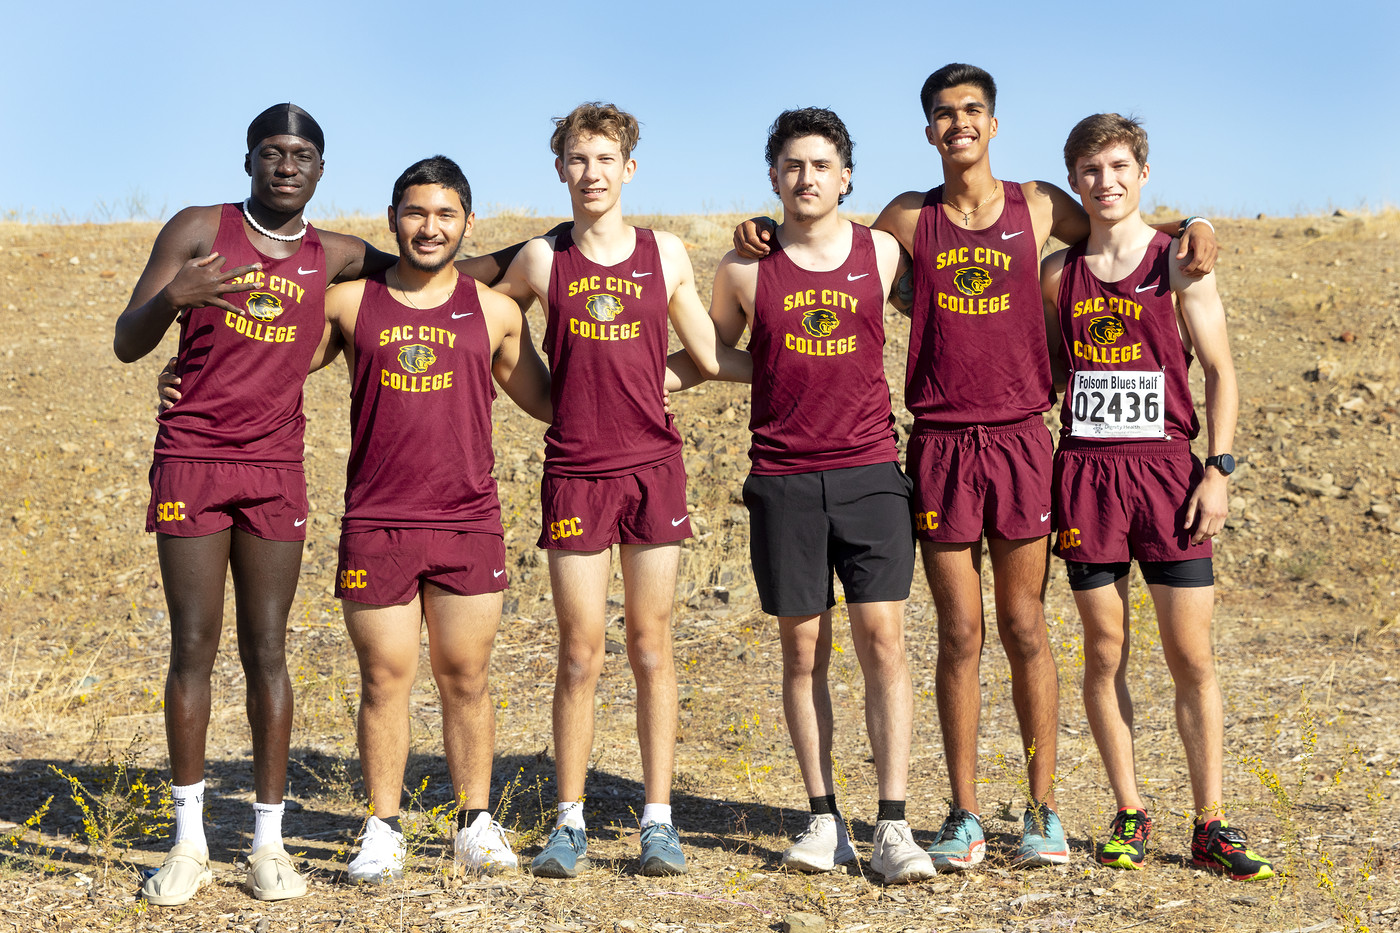 Walker, Campos and Hupiu are the top 3 runners for the men's team at the Modesto Invite; Panthers finish in 5th place